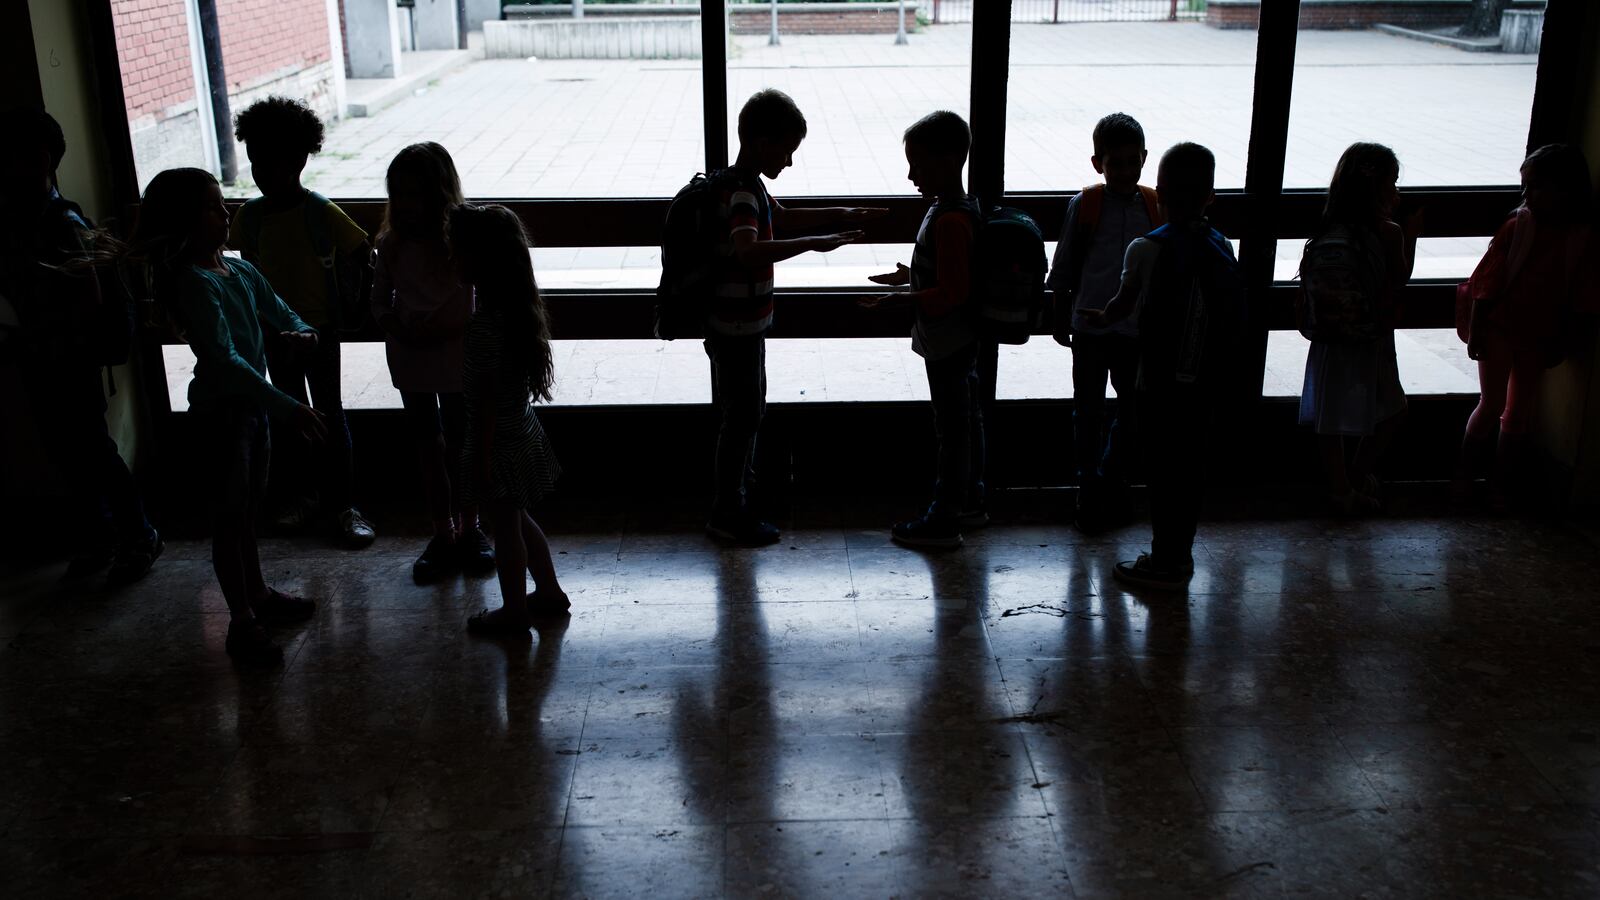 A large group of students speak together in a hallway, silhouetted against a window.